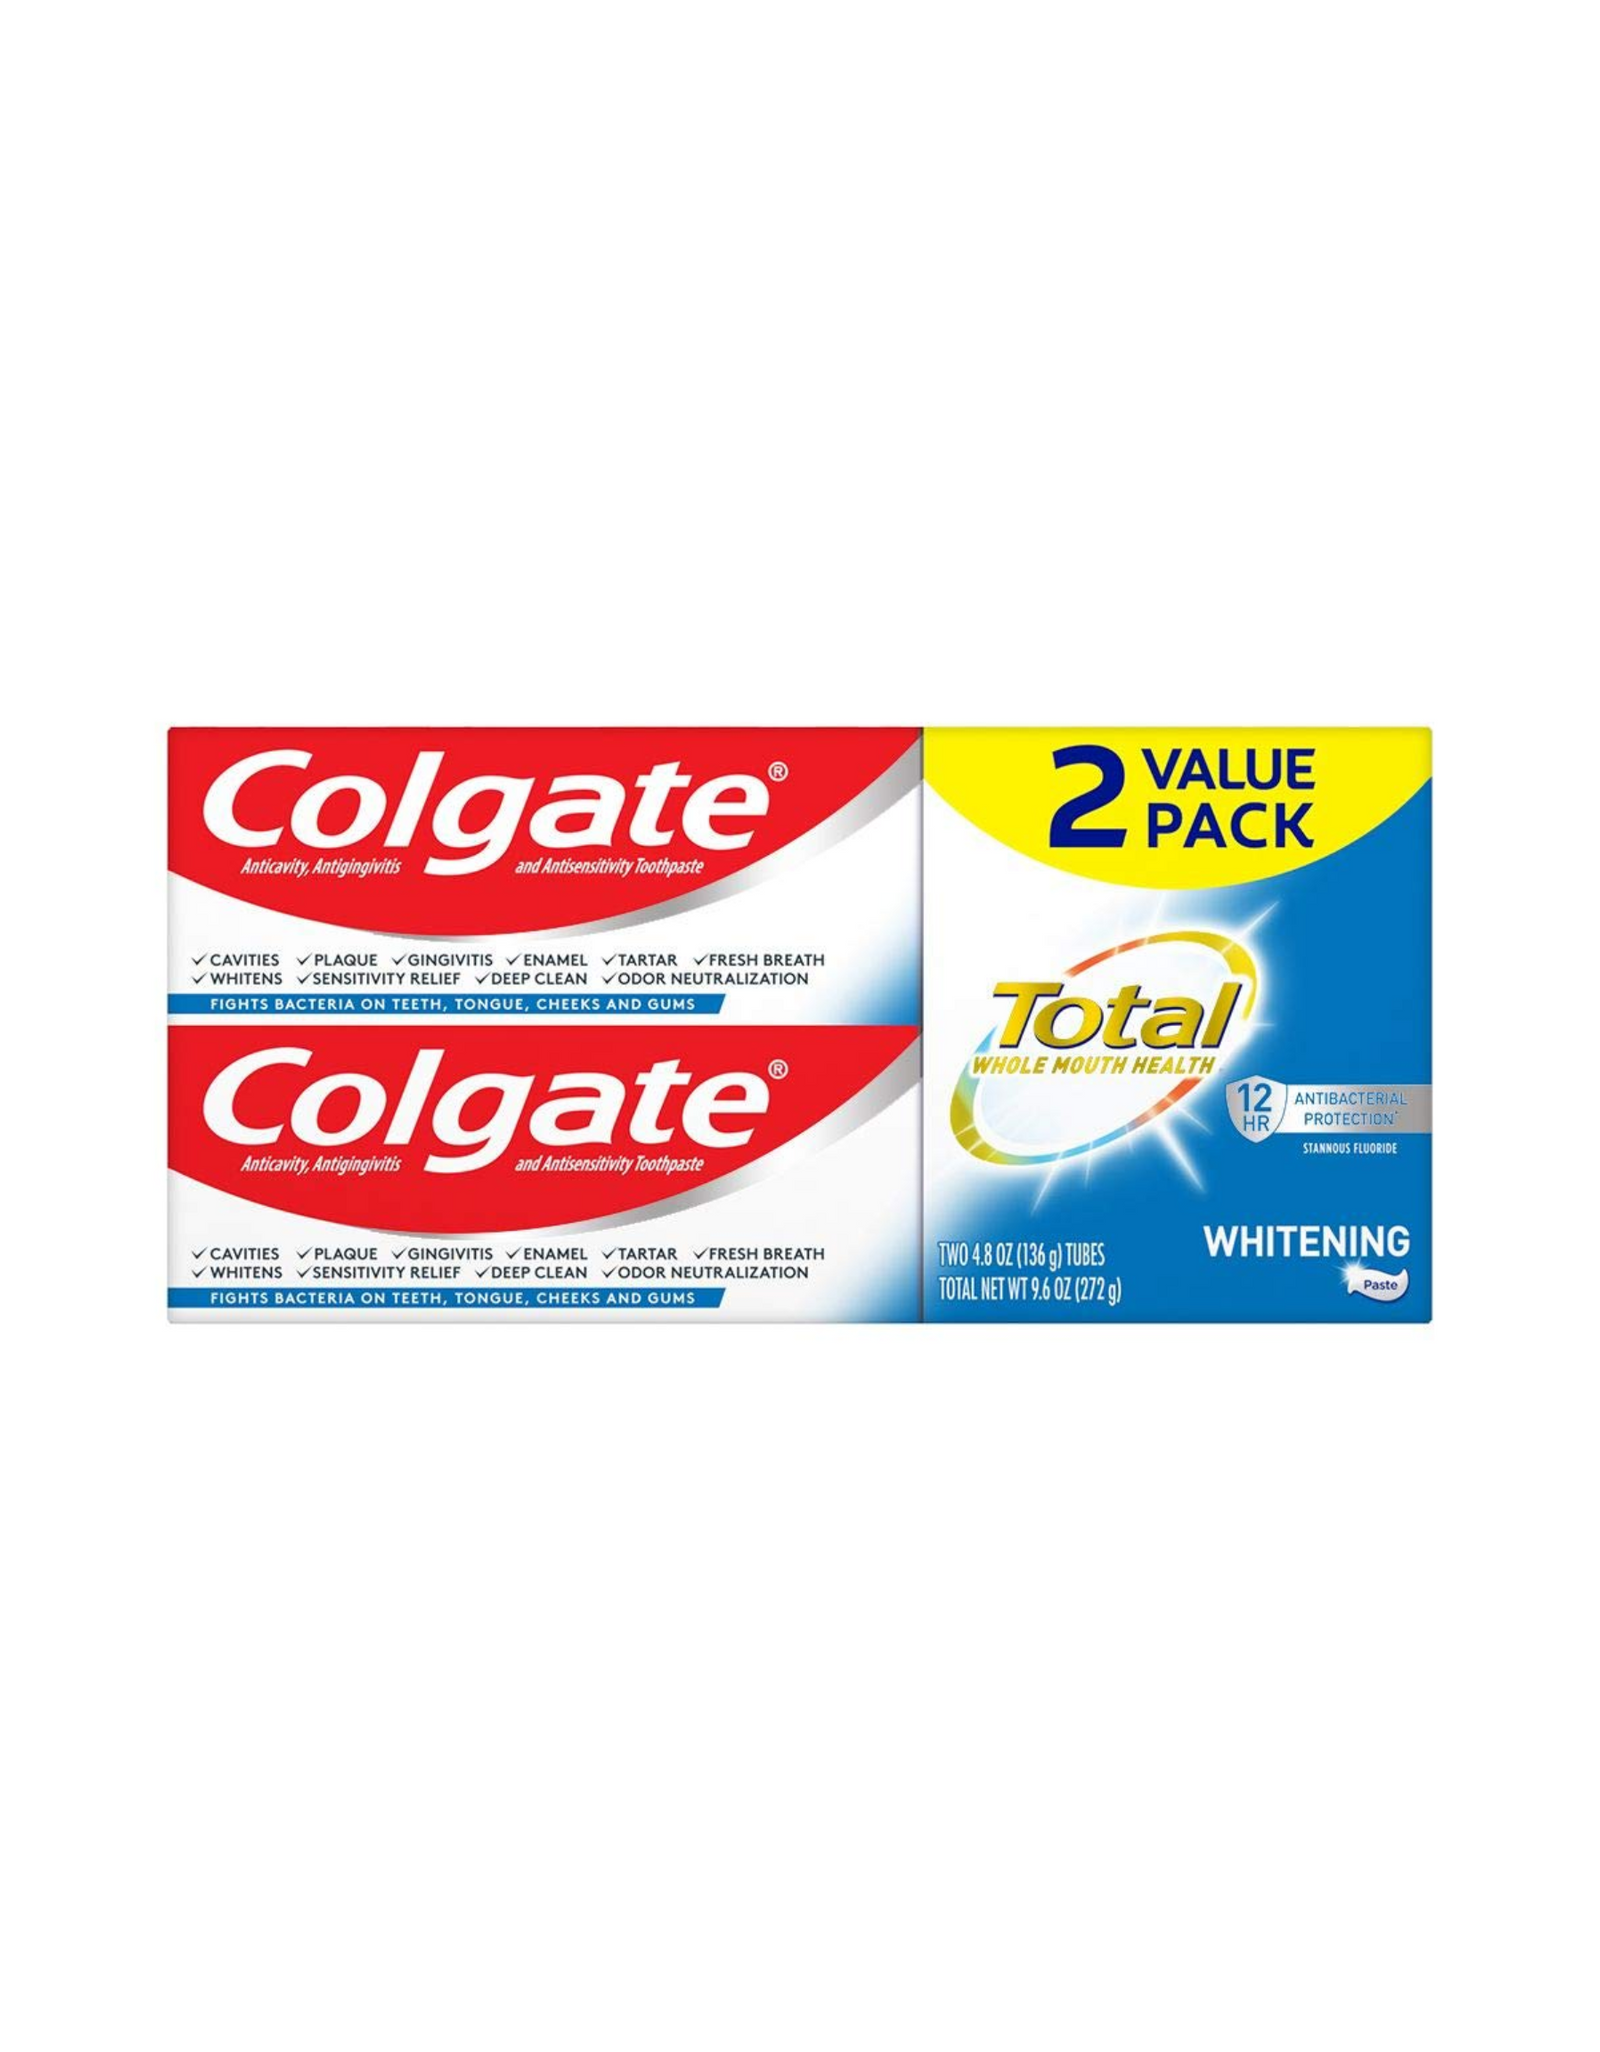 Colgate Total Whitening Toothpaste, Sensitivity Relief and Cavity Protection Mint,4.8 oz each (Pack of 2)